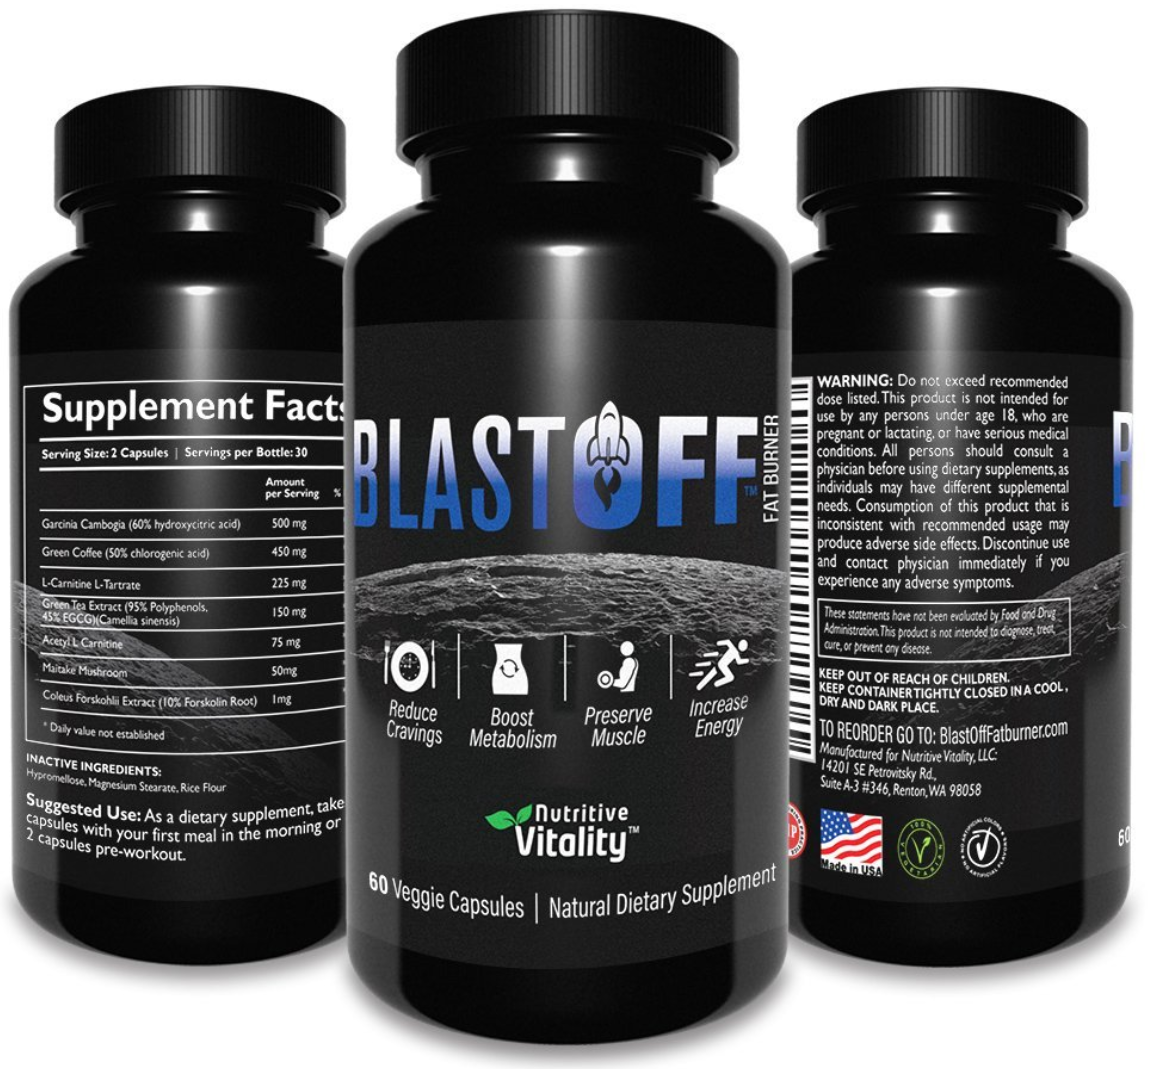 Blast Off Fat Burner Review | Scams, Side Effects ...